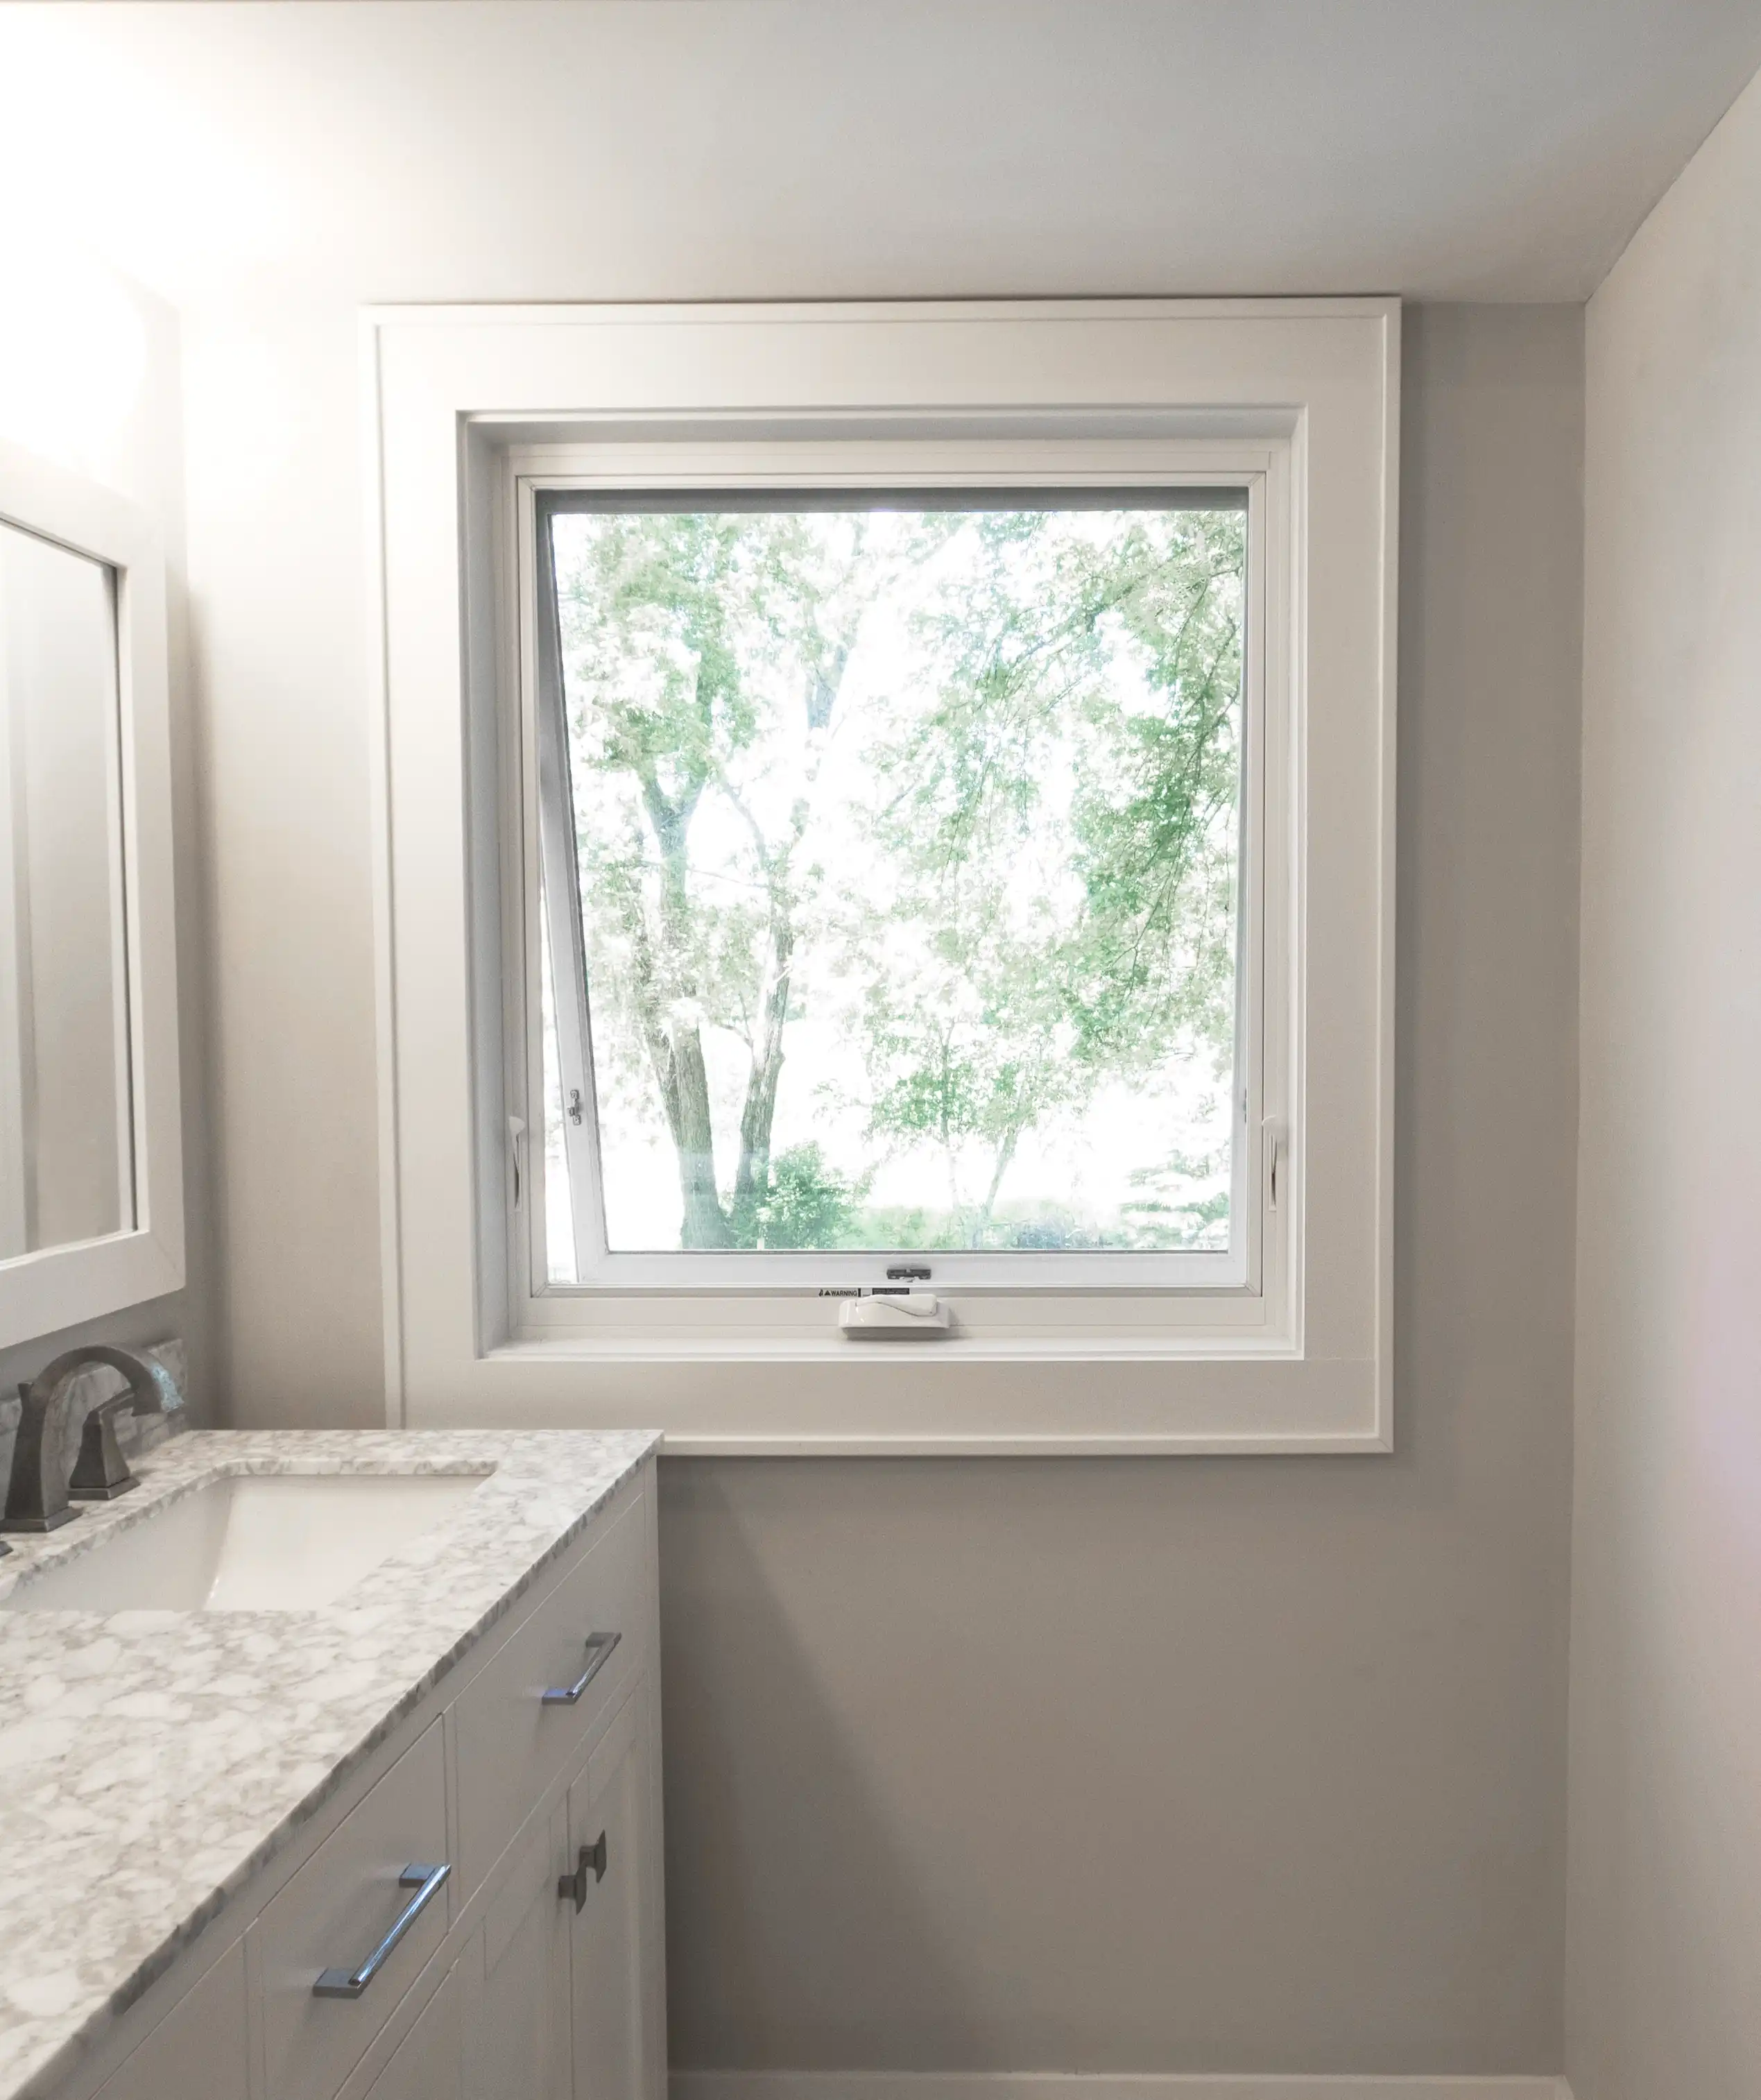 View of an open Marvin Replacement Awning window in a white bathroom with marble countertop.